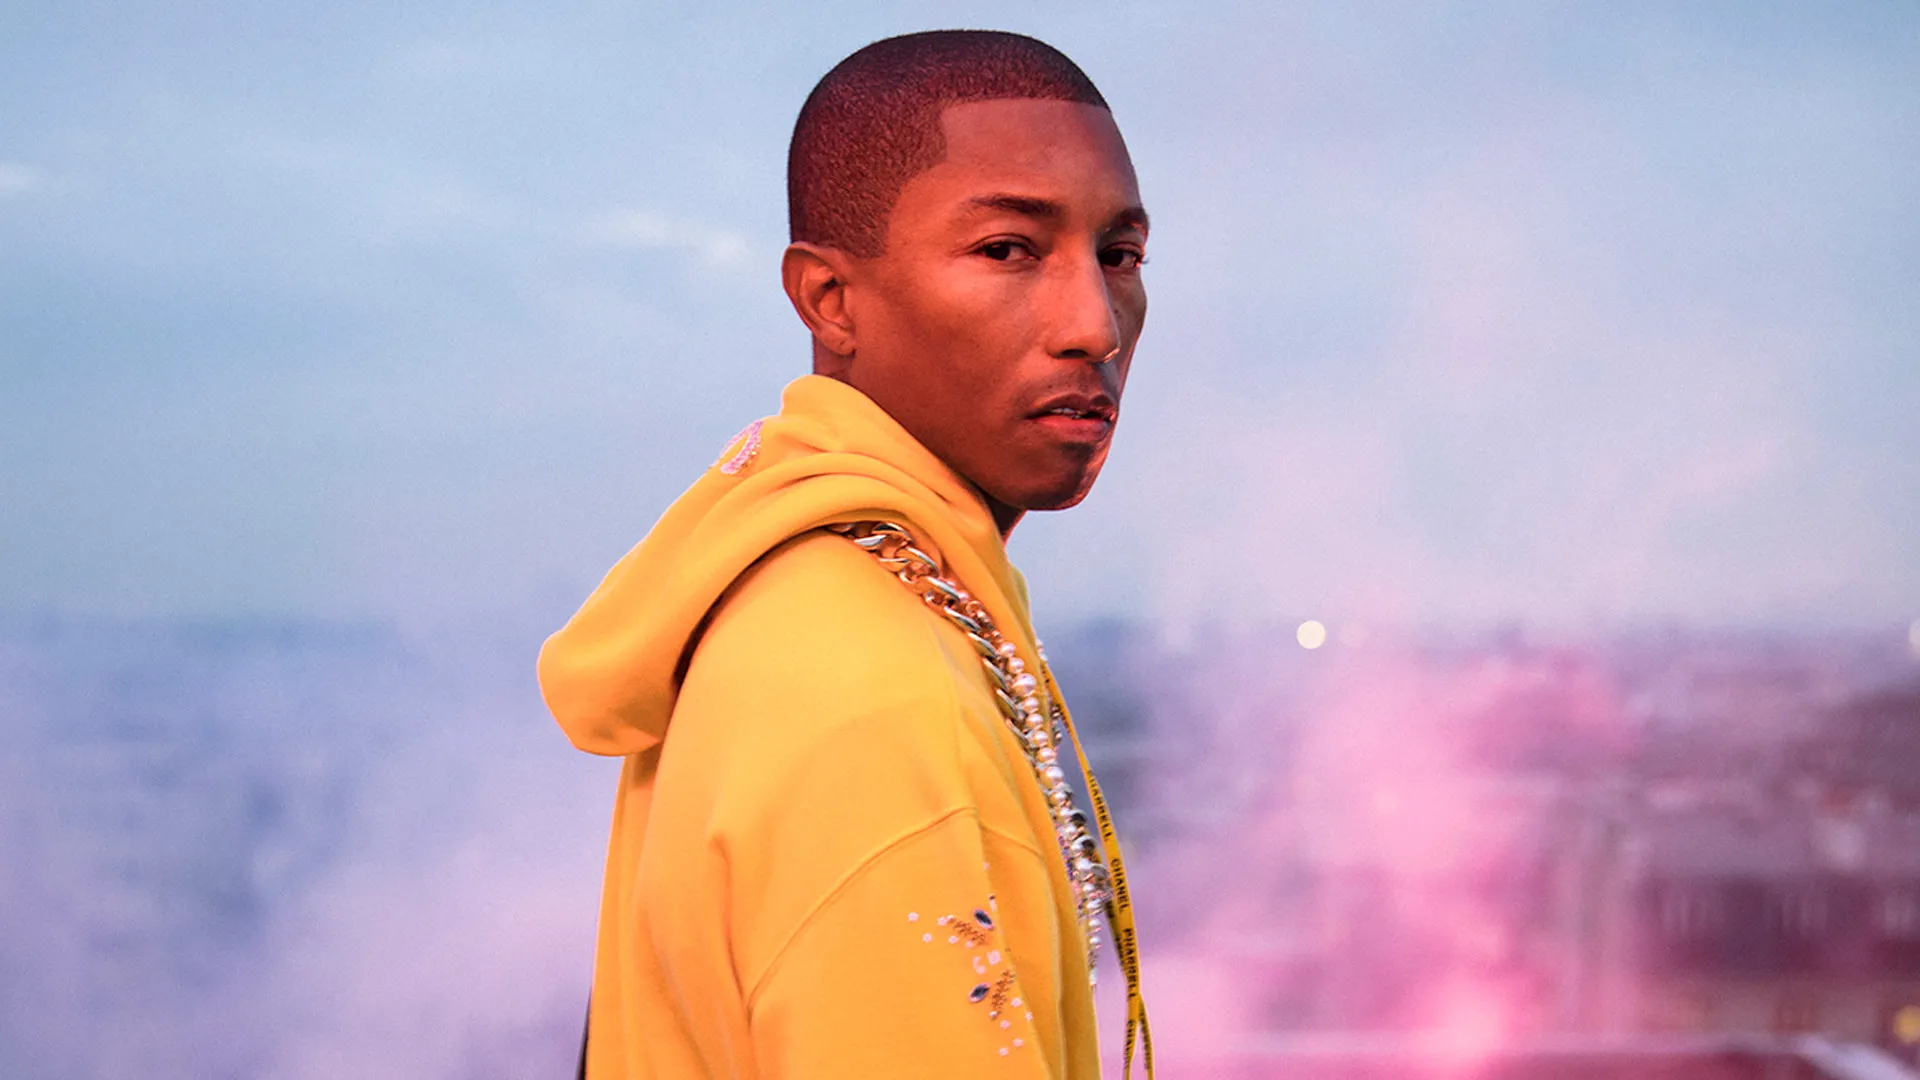 1920x1080 This is how Pharrell Williams' collaboration with Chanel came to be | VOGUE India | Vogue India